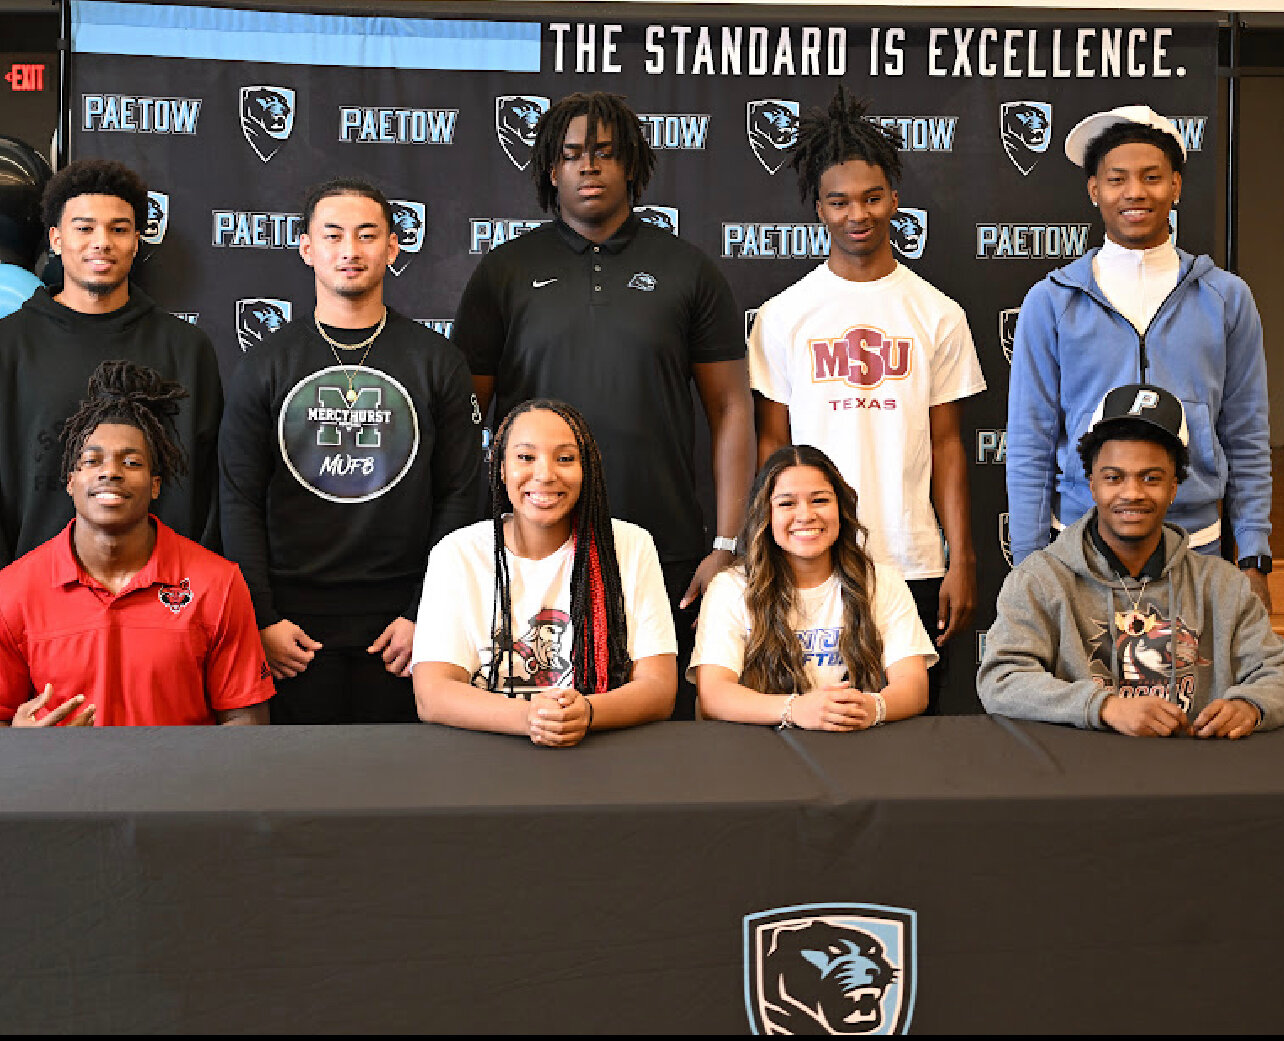 Paetow student athletes pose for a photo during the signing ceremony at Paetow High School.